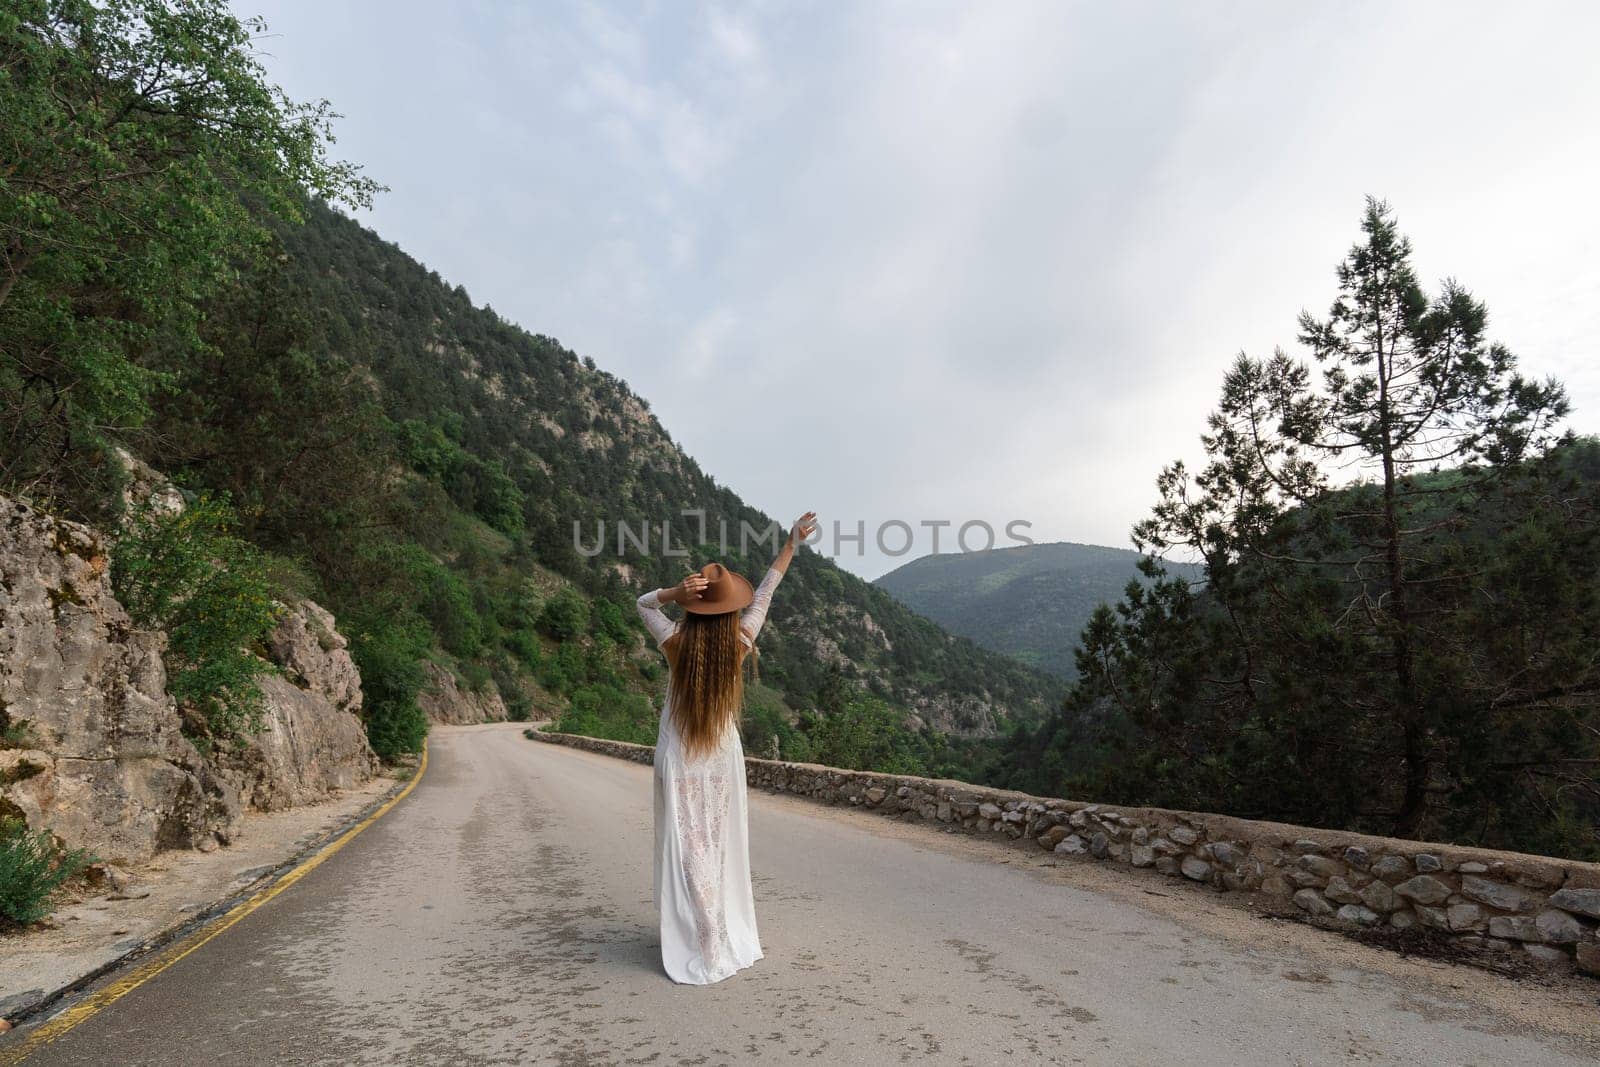 A woman in a white dress is standing on a road, with a hat on her head. The scene is set in a mountainous area, with trees in the background. The woman is enjoying the view and the fresh air